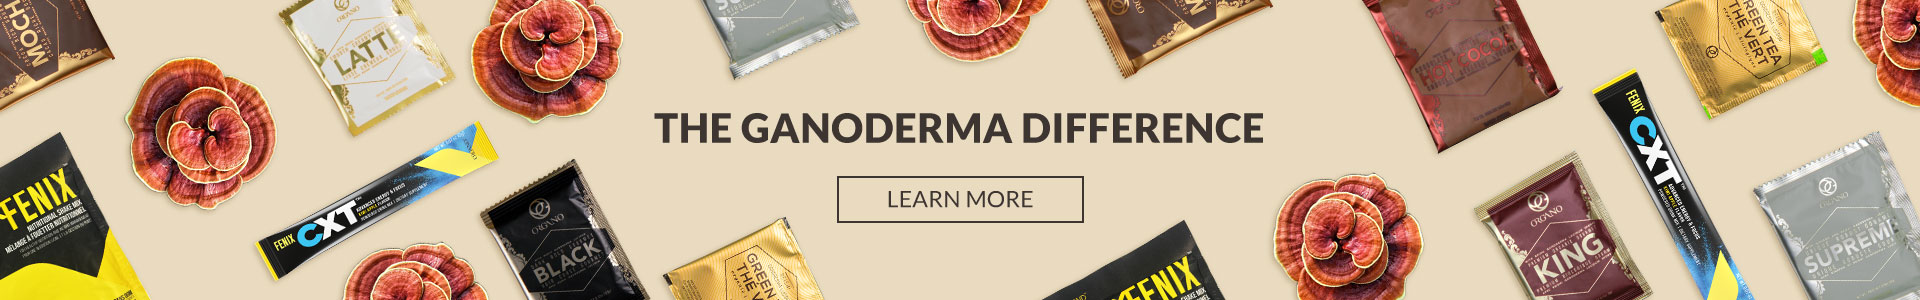 Ganoderma Difference